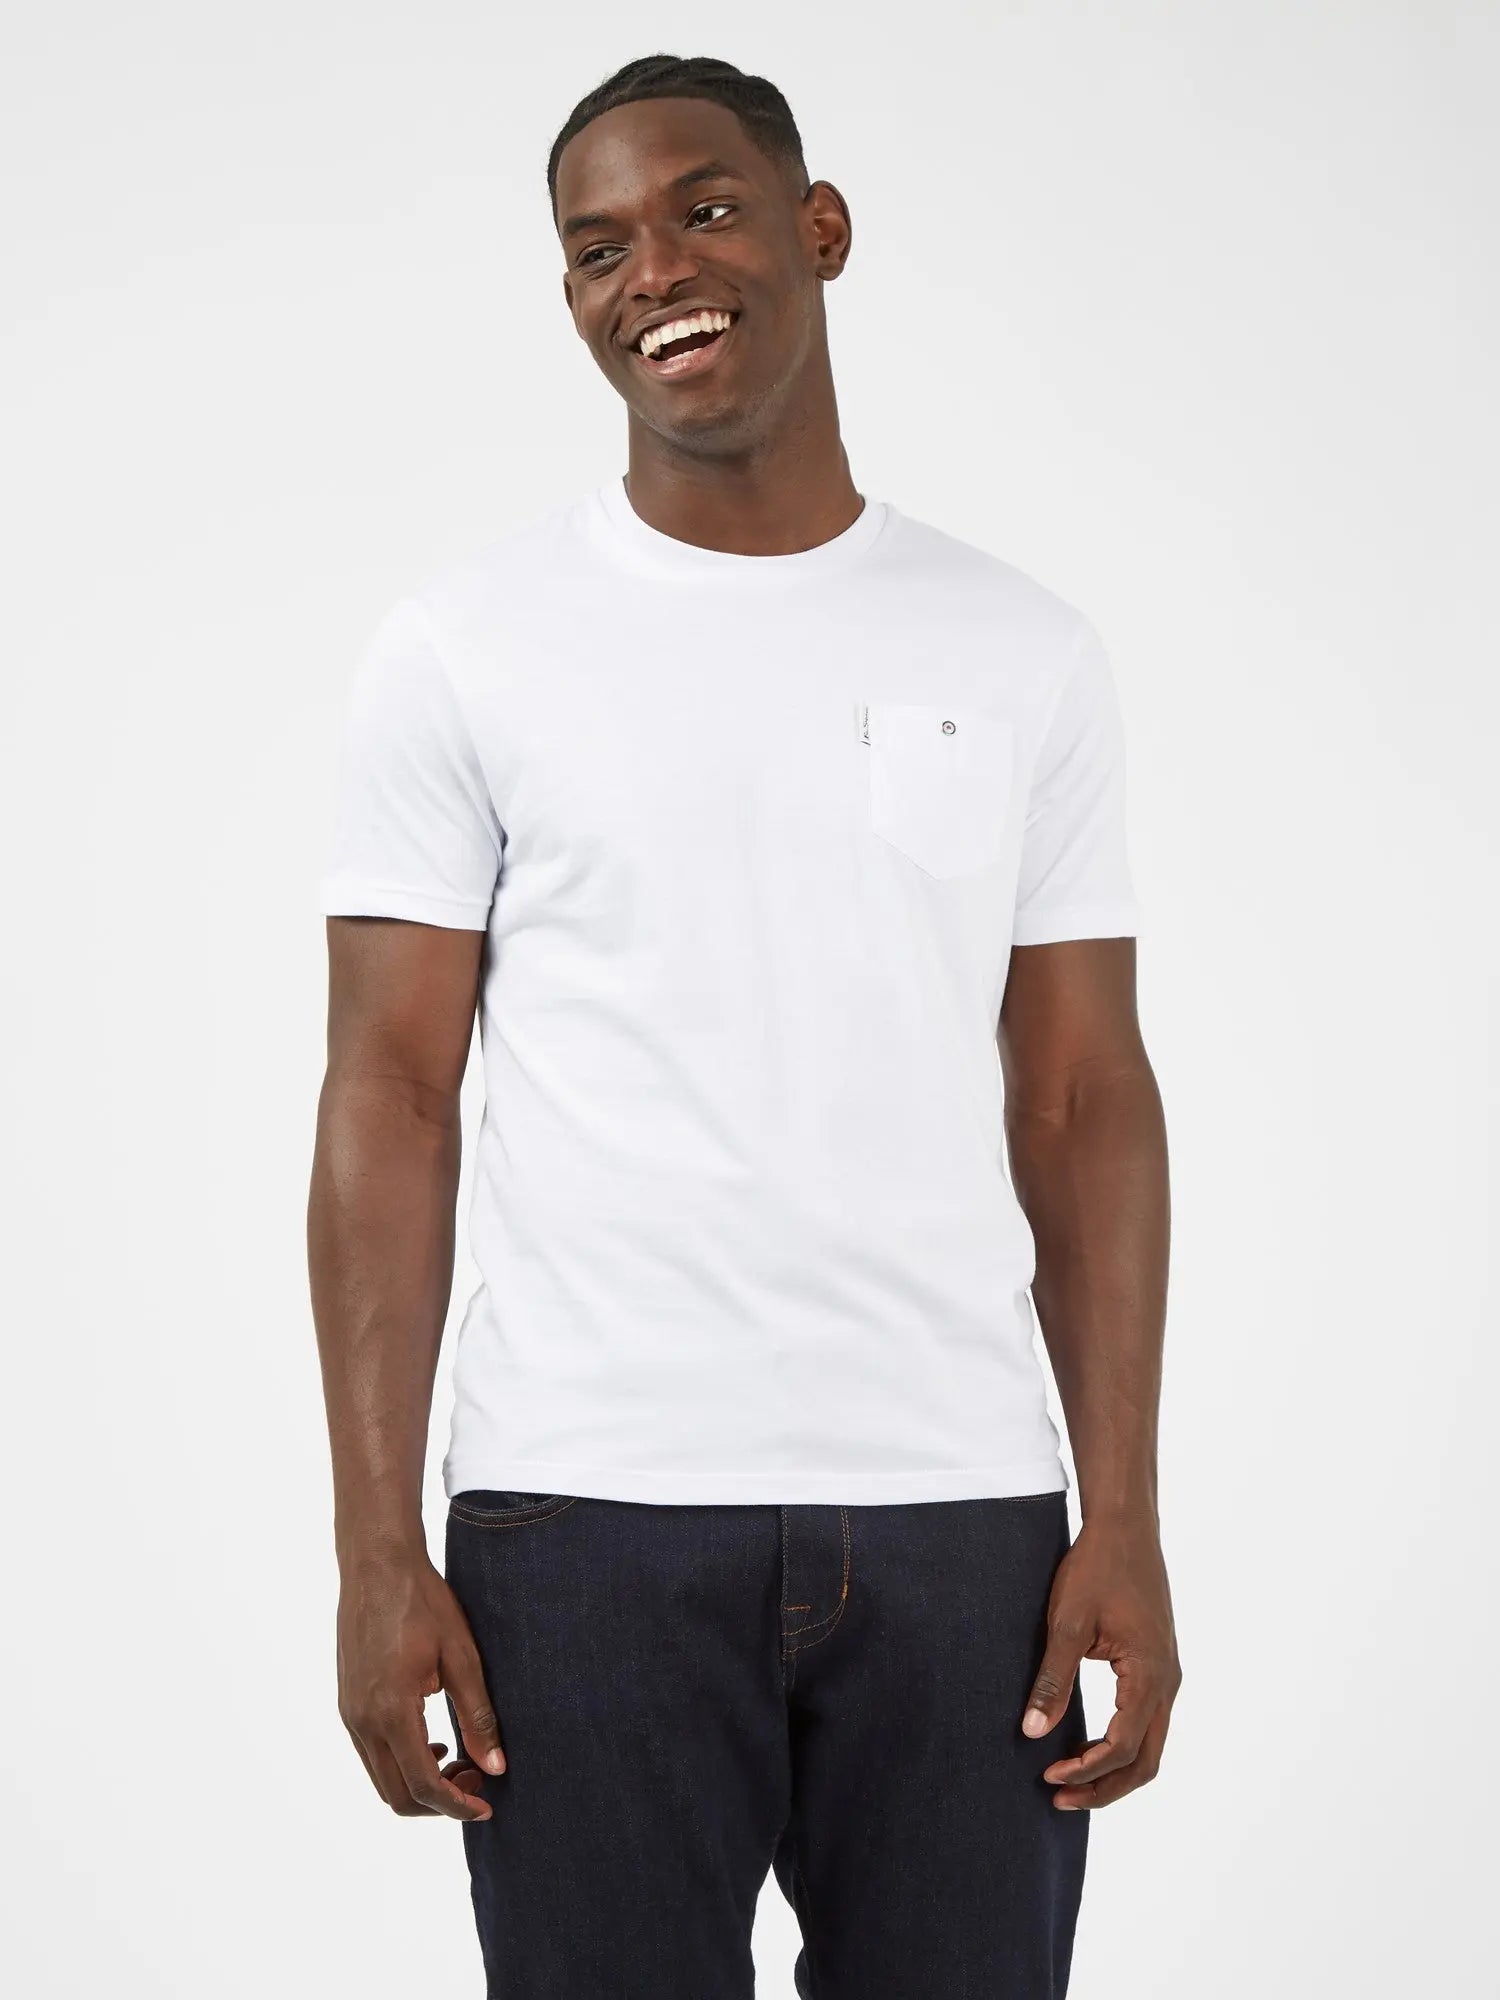 Ben Sherman Signature Tee in White with Chest Pocket From Woven Durham